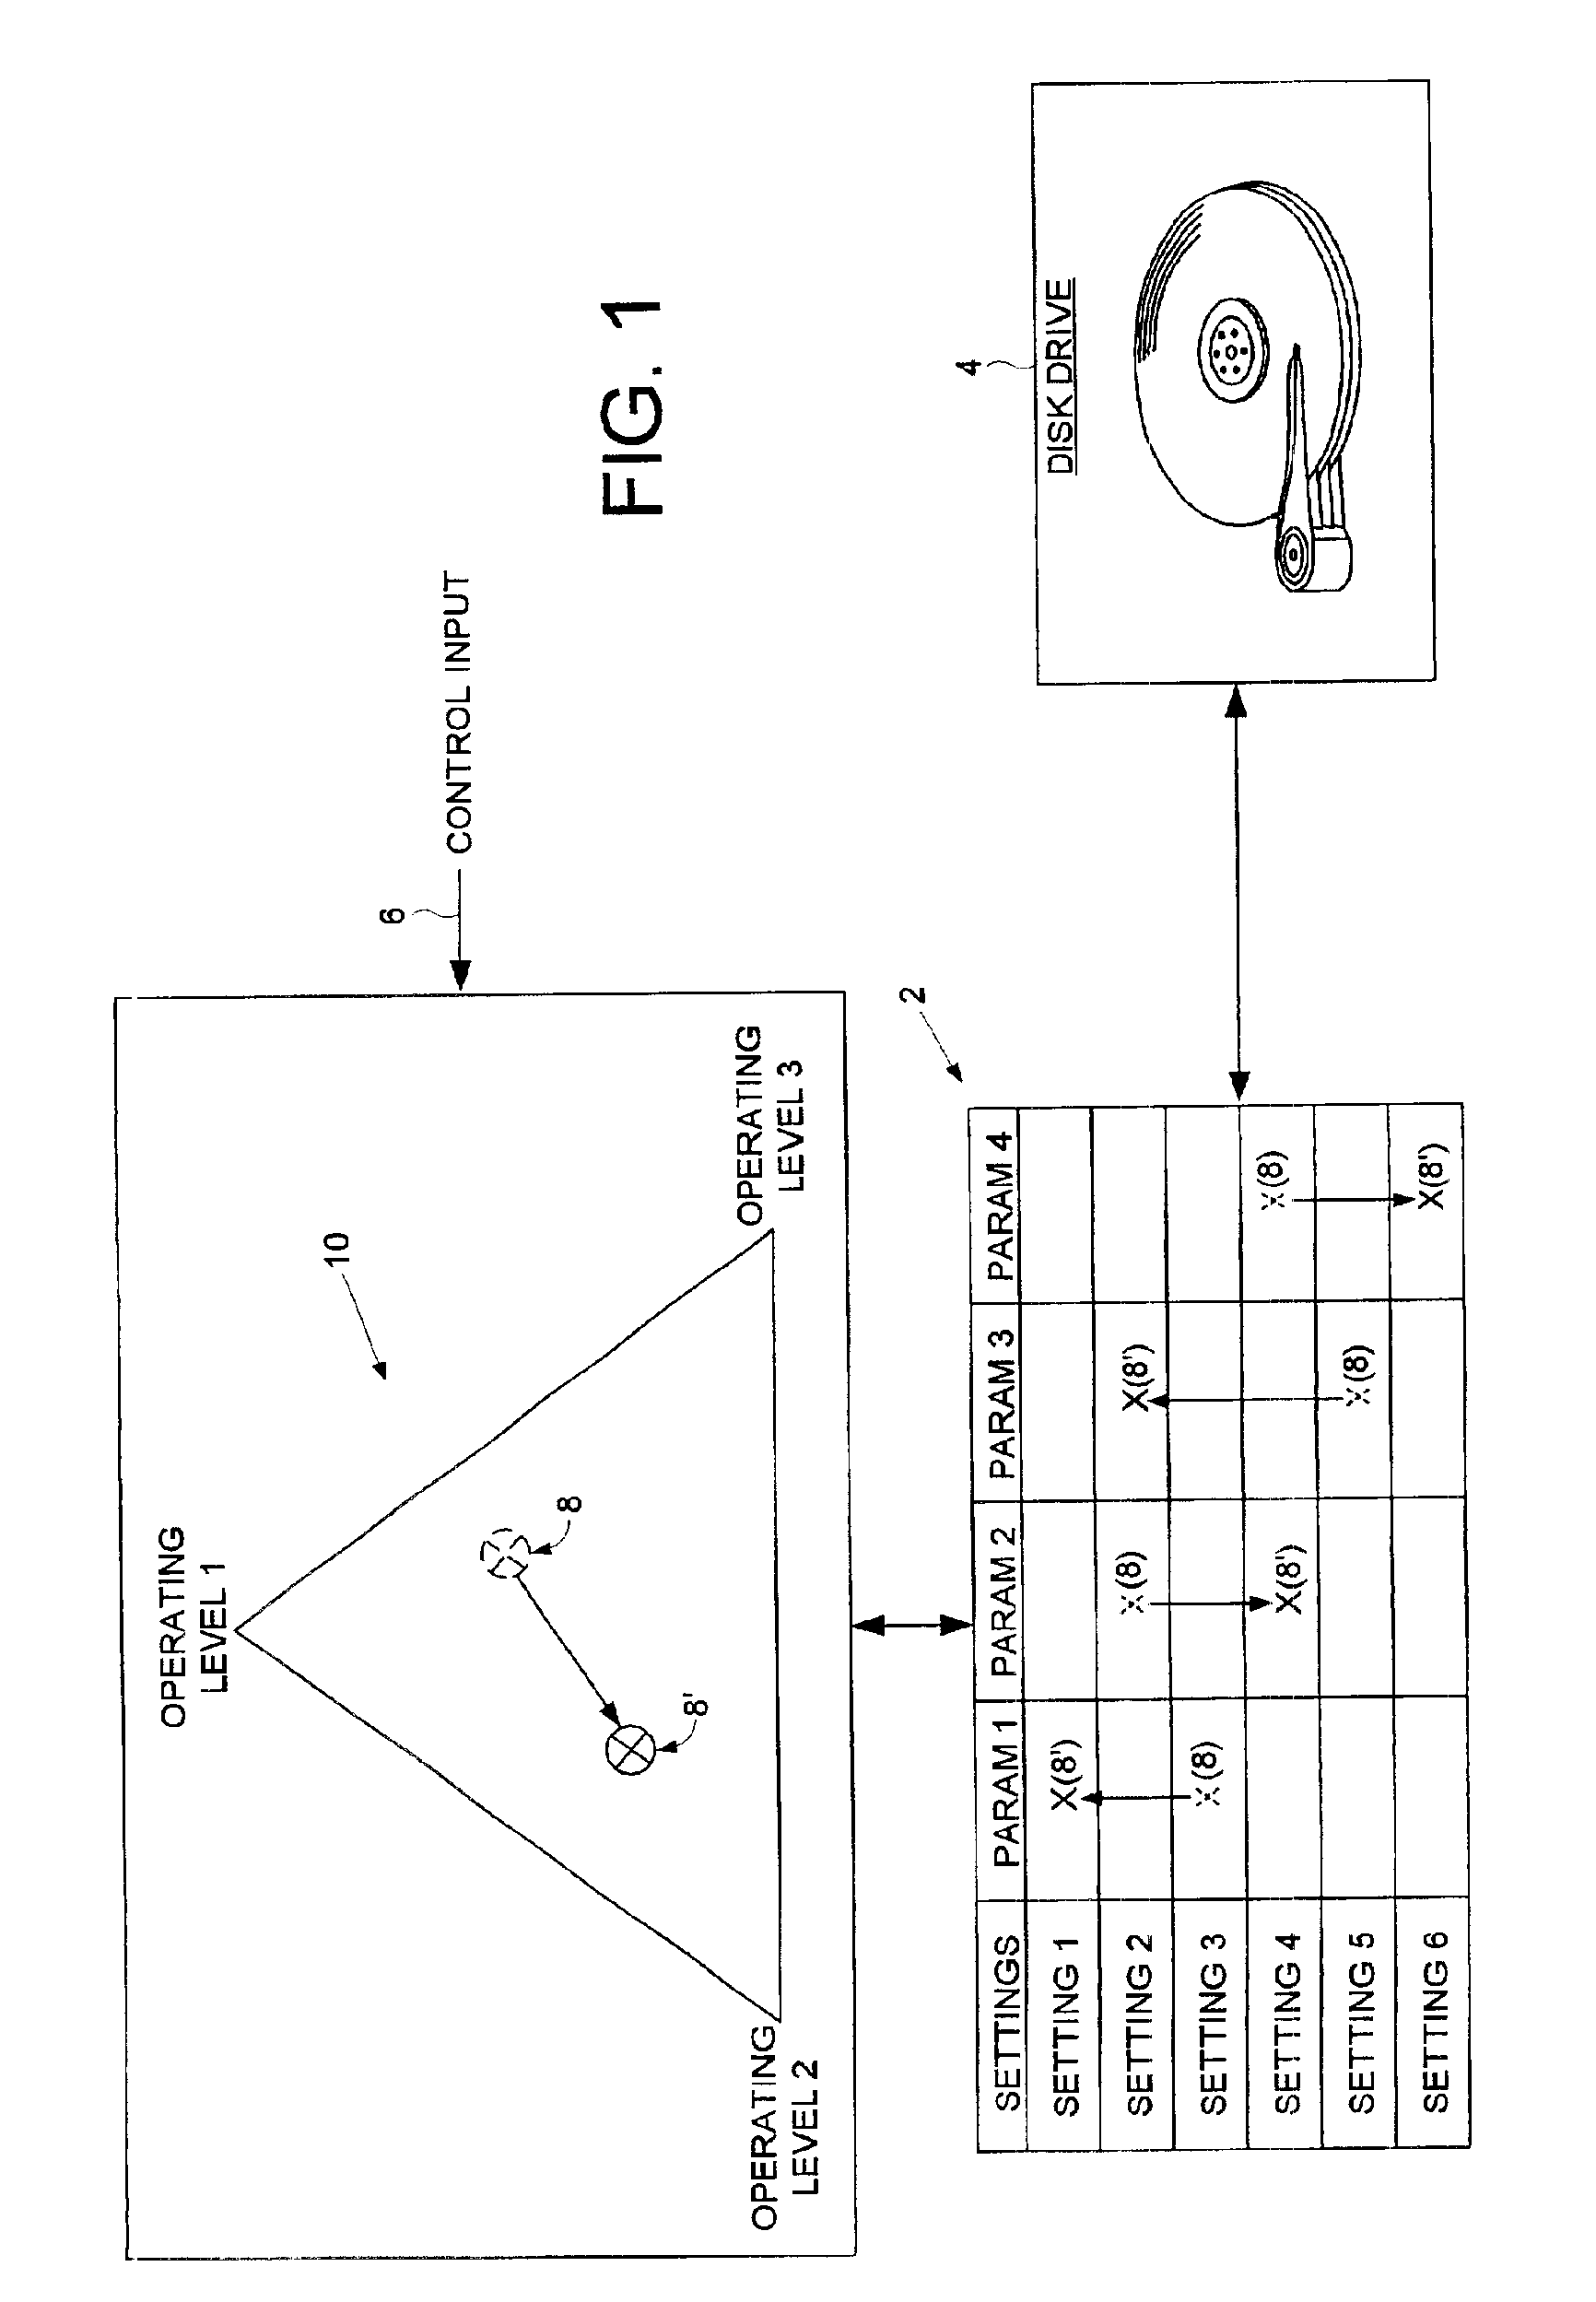 Dependently adjusting at least three operating levels of a disk drive by dependently adjusting a plurality of disk drive parameters